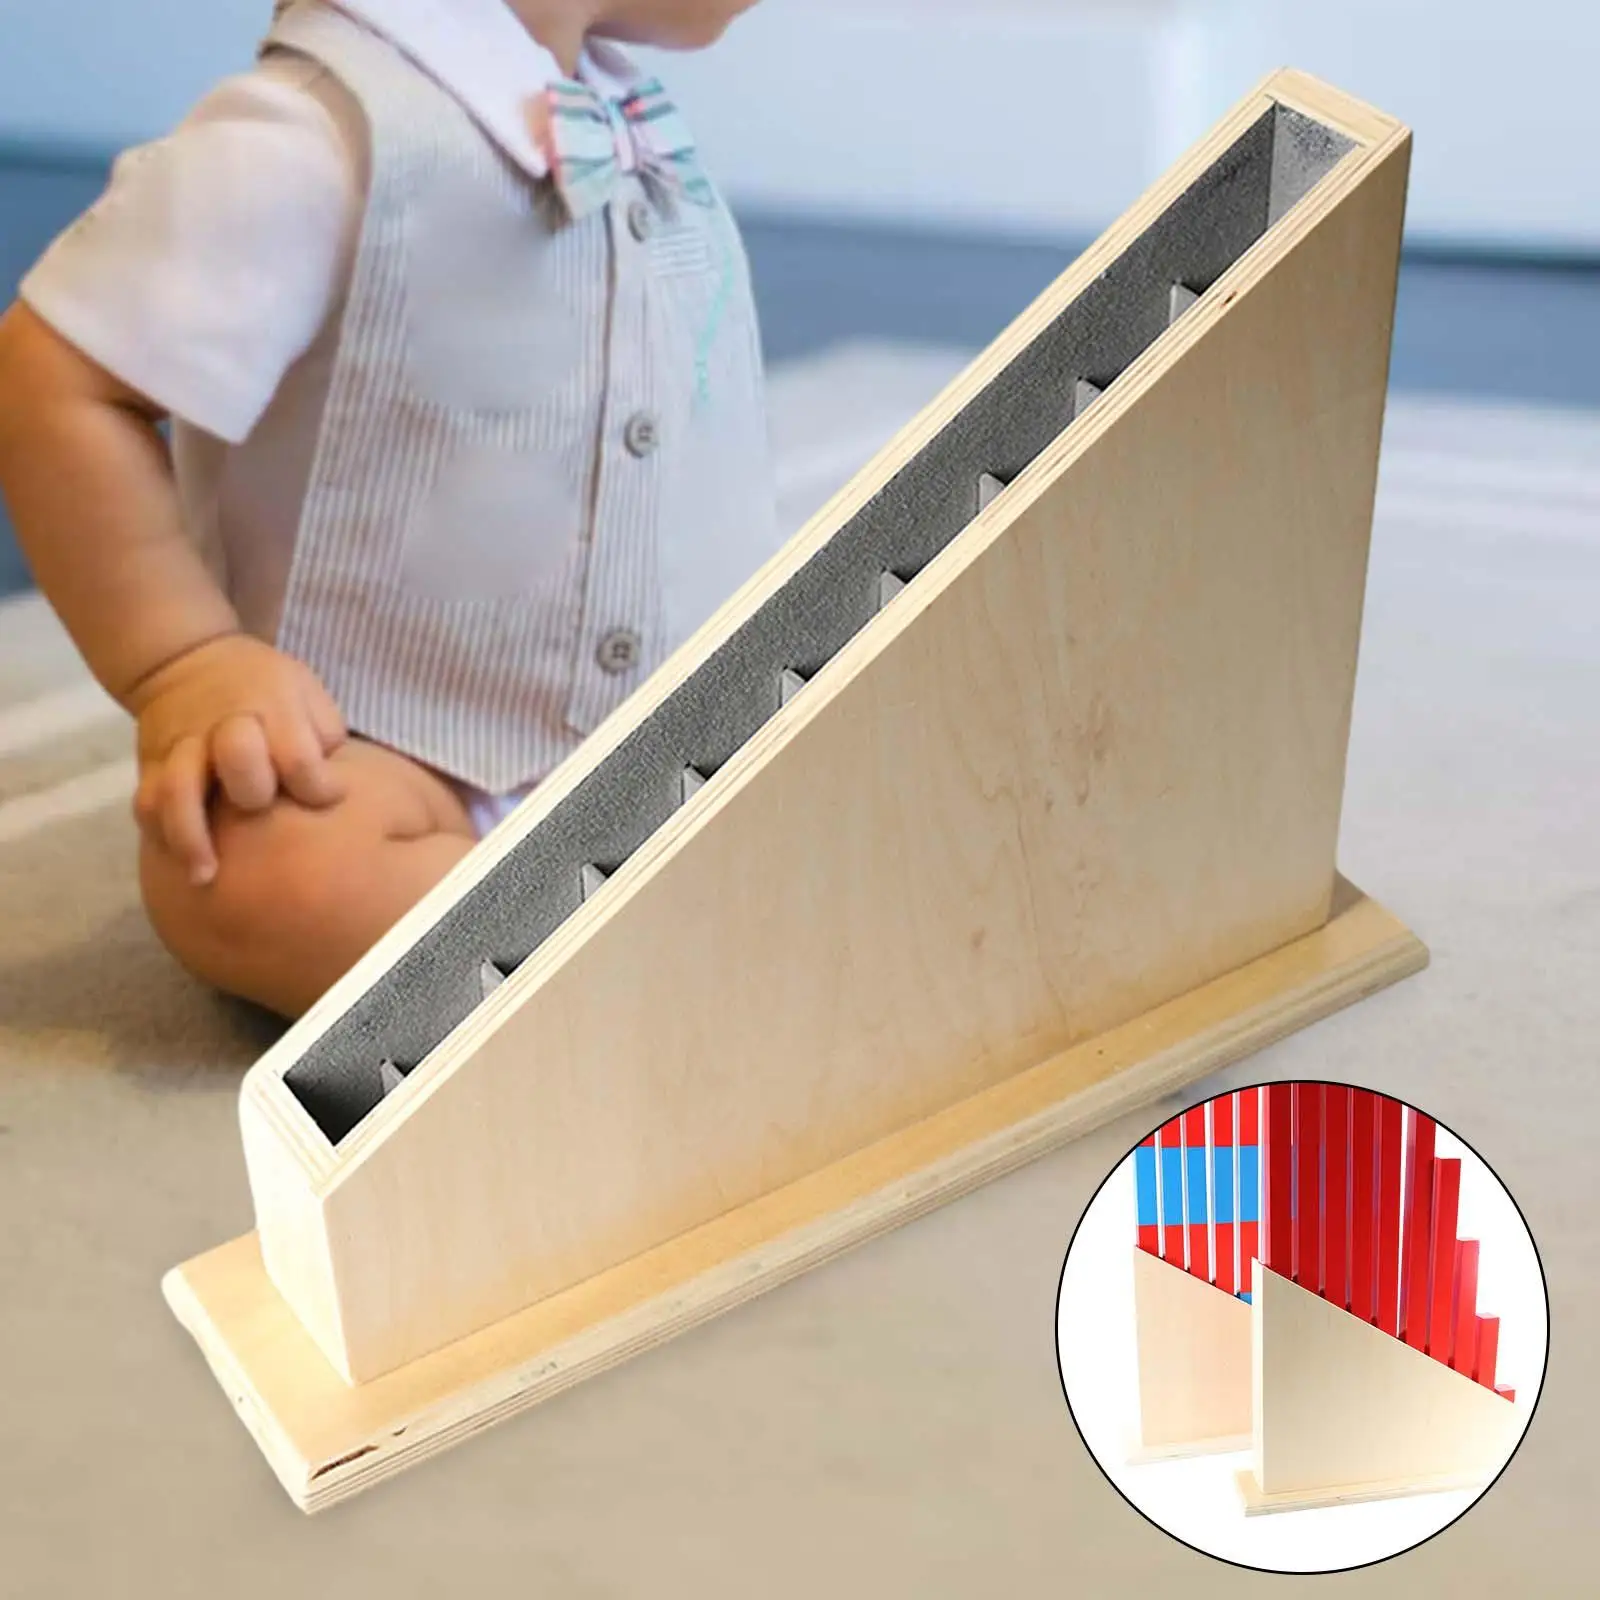 Montessori Rods Stand Long Rod Stand Sensorial Materials Games Measuring Wooden Number Rods Rack for Kids Children Homeschool